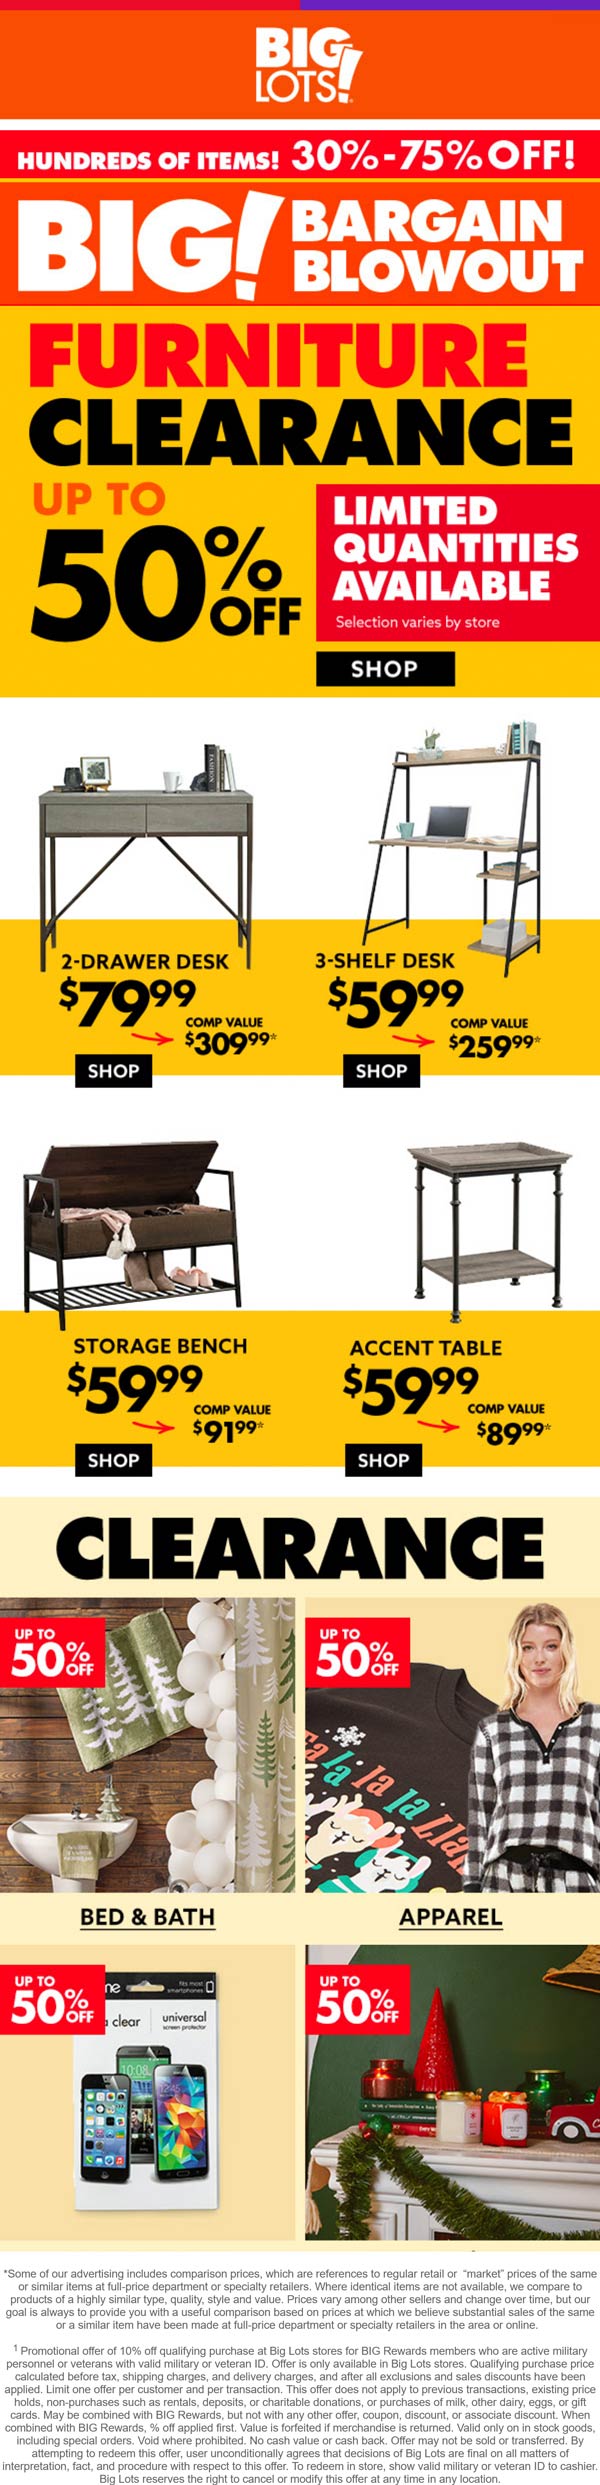 Big Lots stores Coupon  30-75% clearance event going on at Big Lots #biglots 